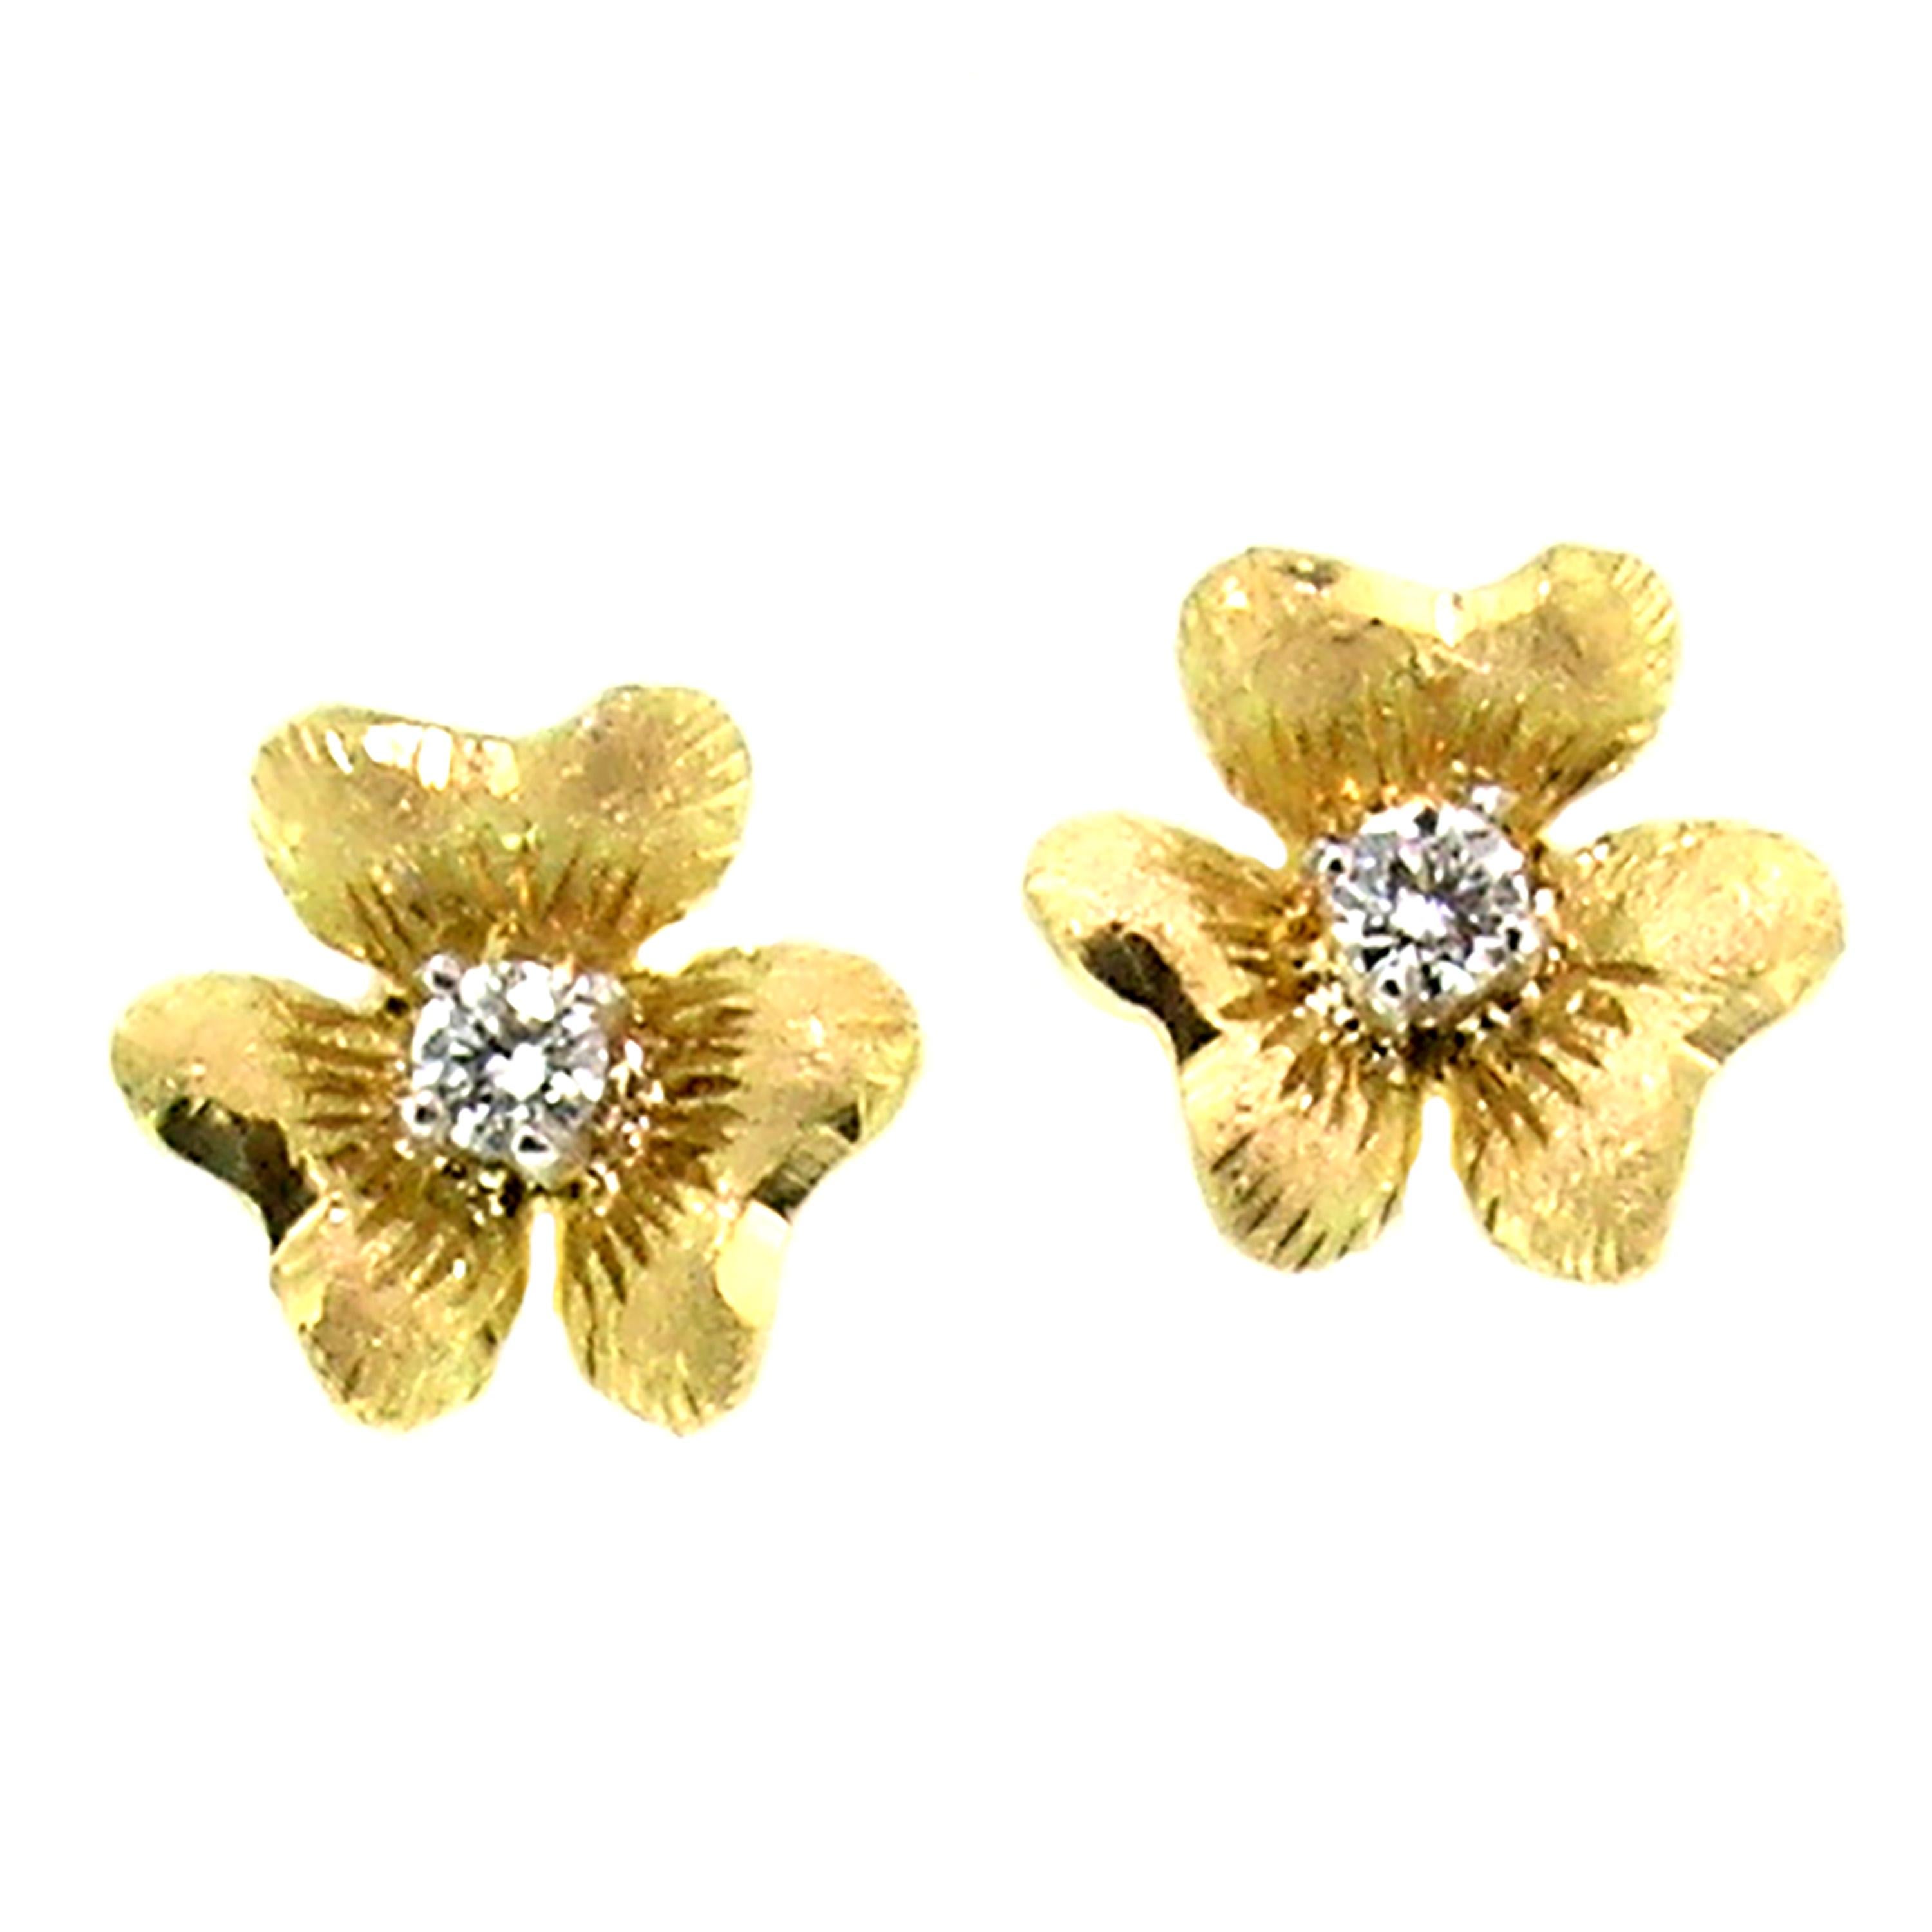 These dainty Floral earrings are finished with richly detailed Florentine engraving.  They are a sculptured, three-dimensional shape that sits beautifully on the ear. These are a perfect everyday earring, a perfect addition to earring stacks, or a